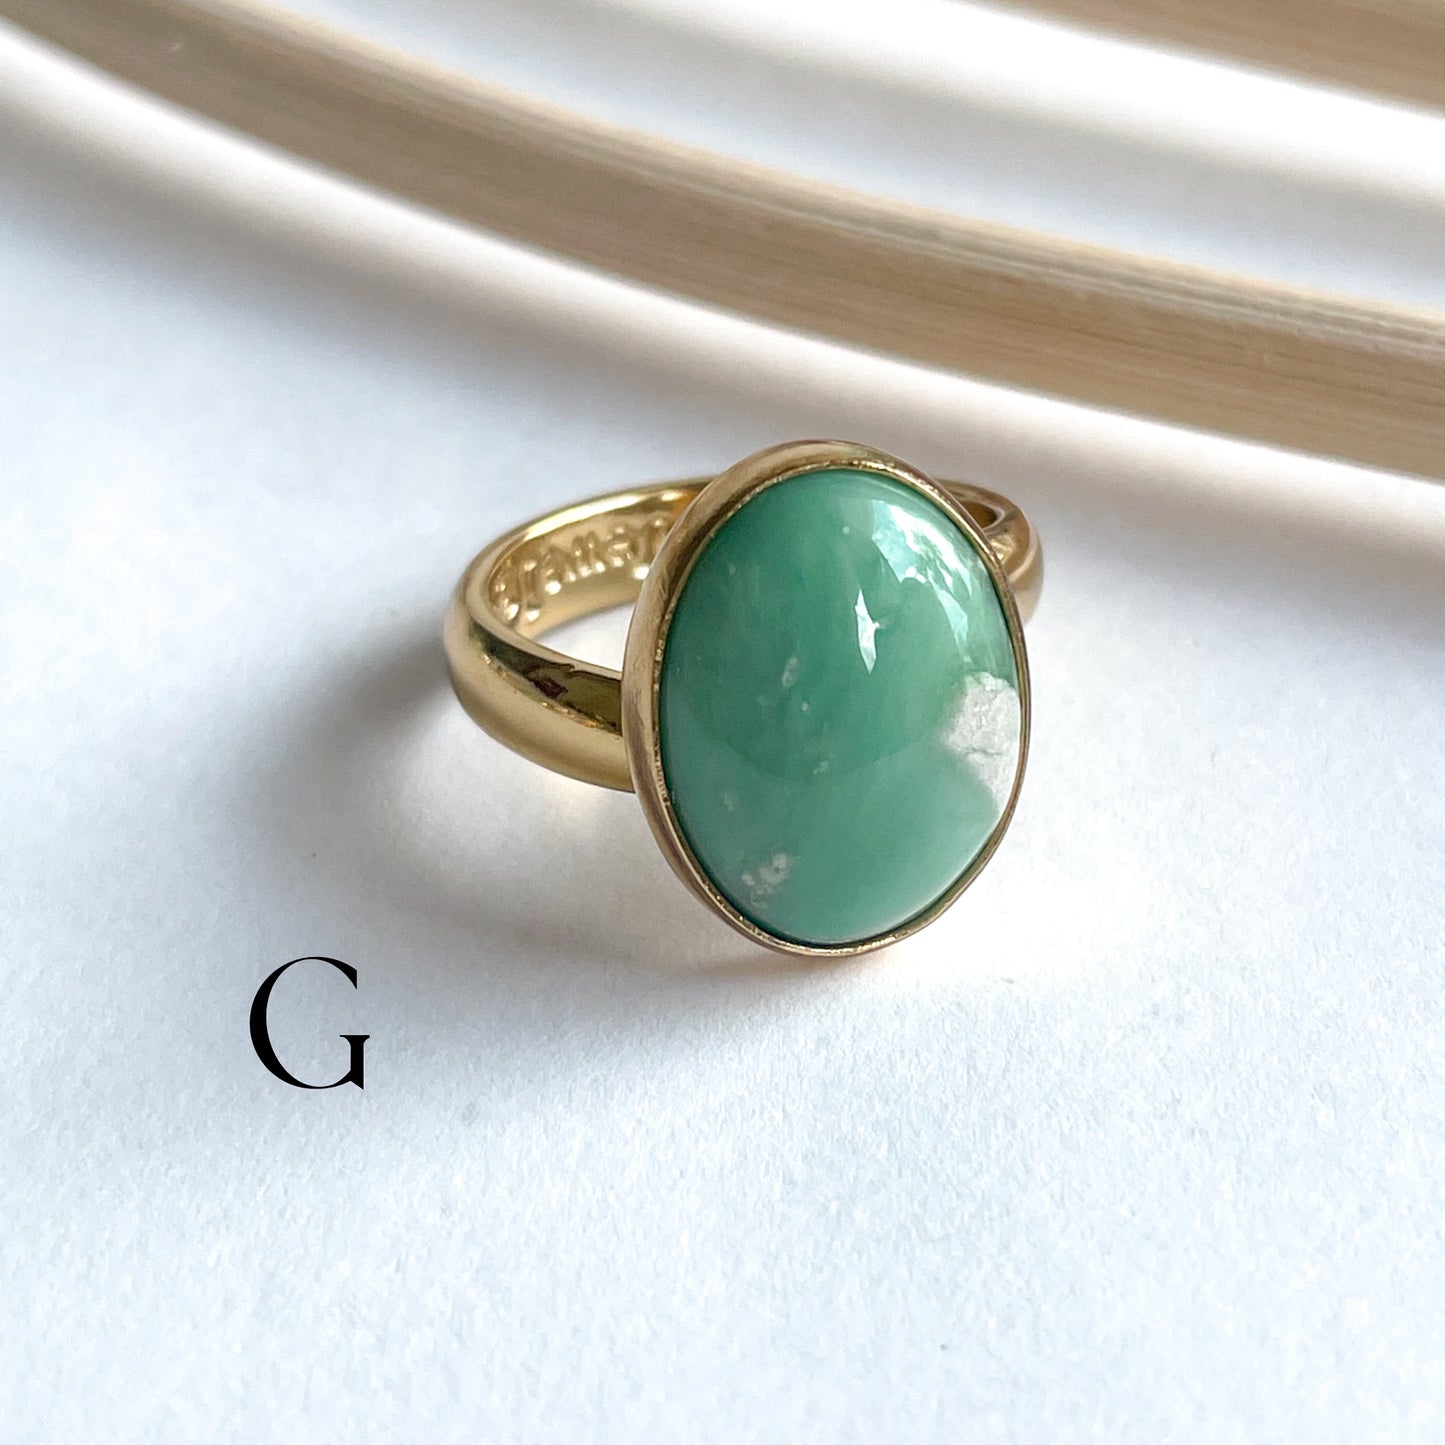 Load image into Gallery viewer, Chrysoprase Oval Ring - Alchemia
